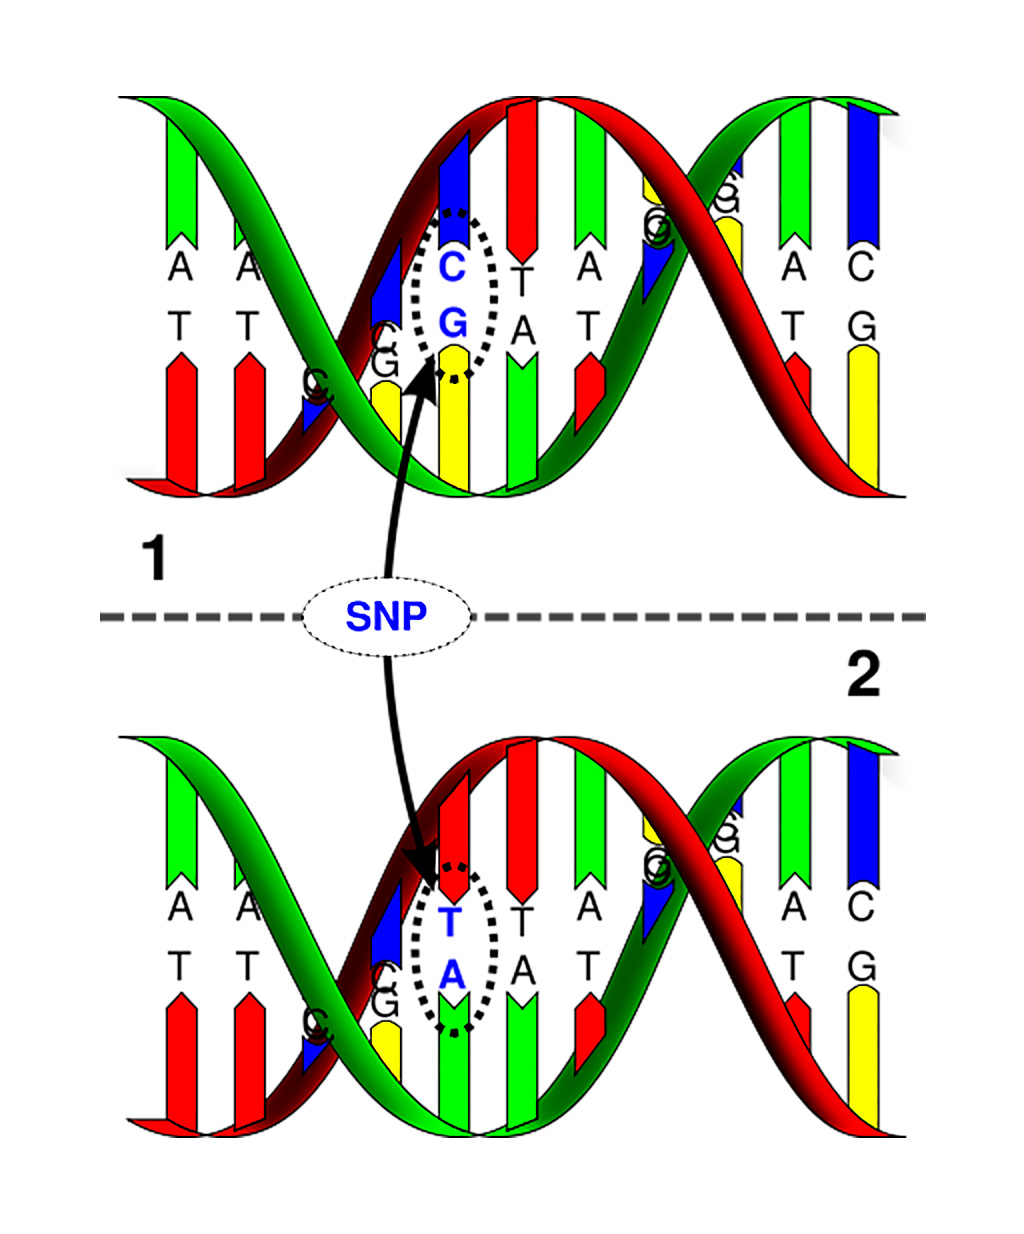 Image: Single nucleotide polymorphism: The upper DNA molecule differs from the lower DNA molecule at a single base-pair location (Photo courtesy of Marshall University).